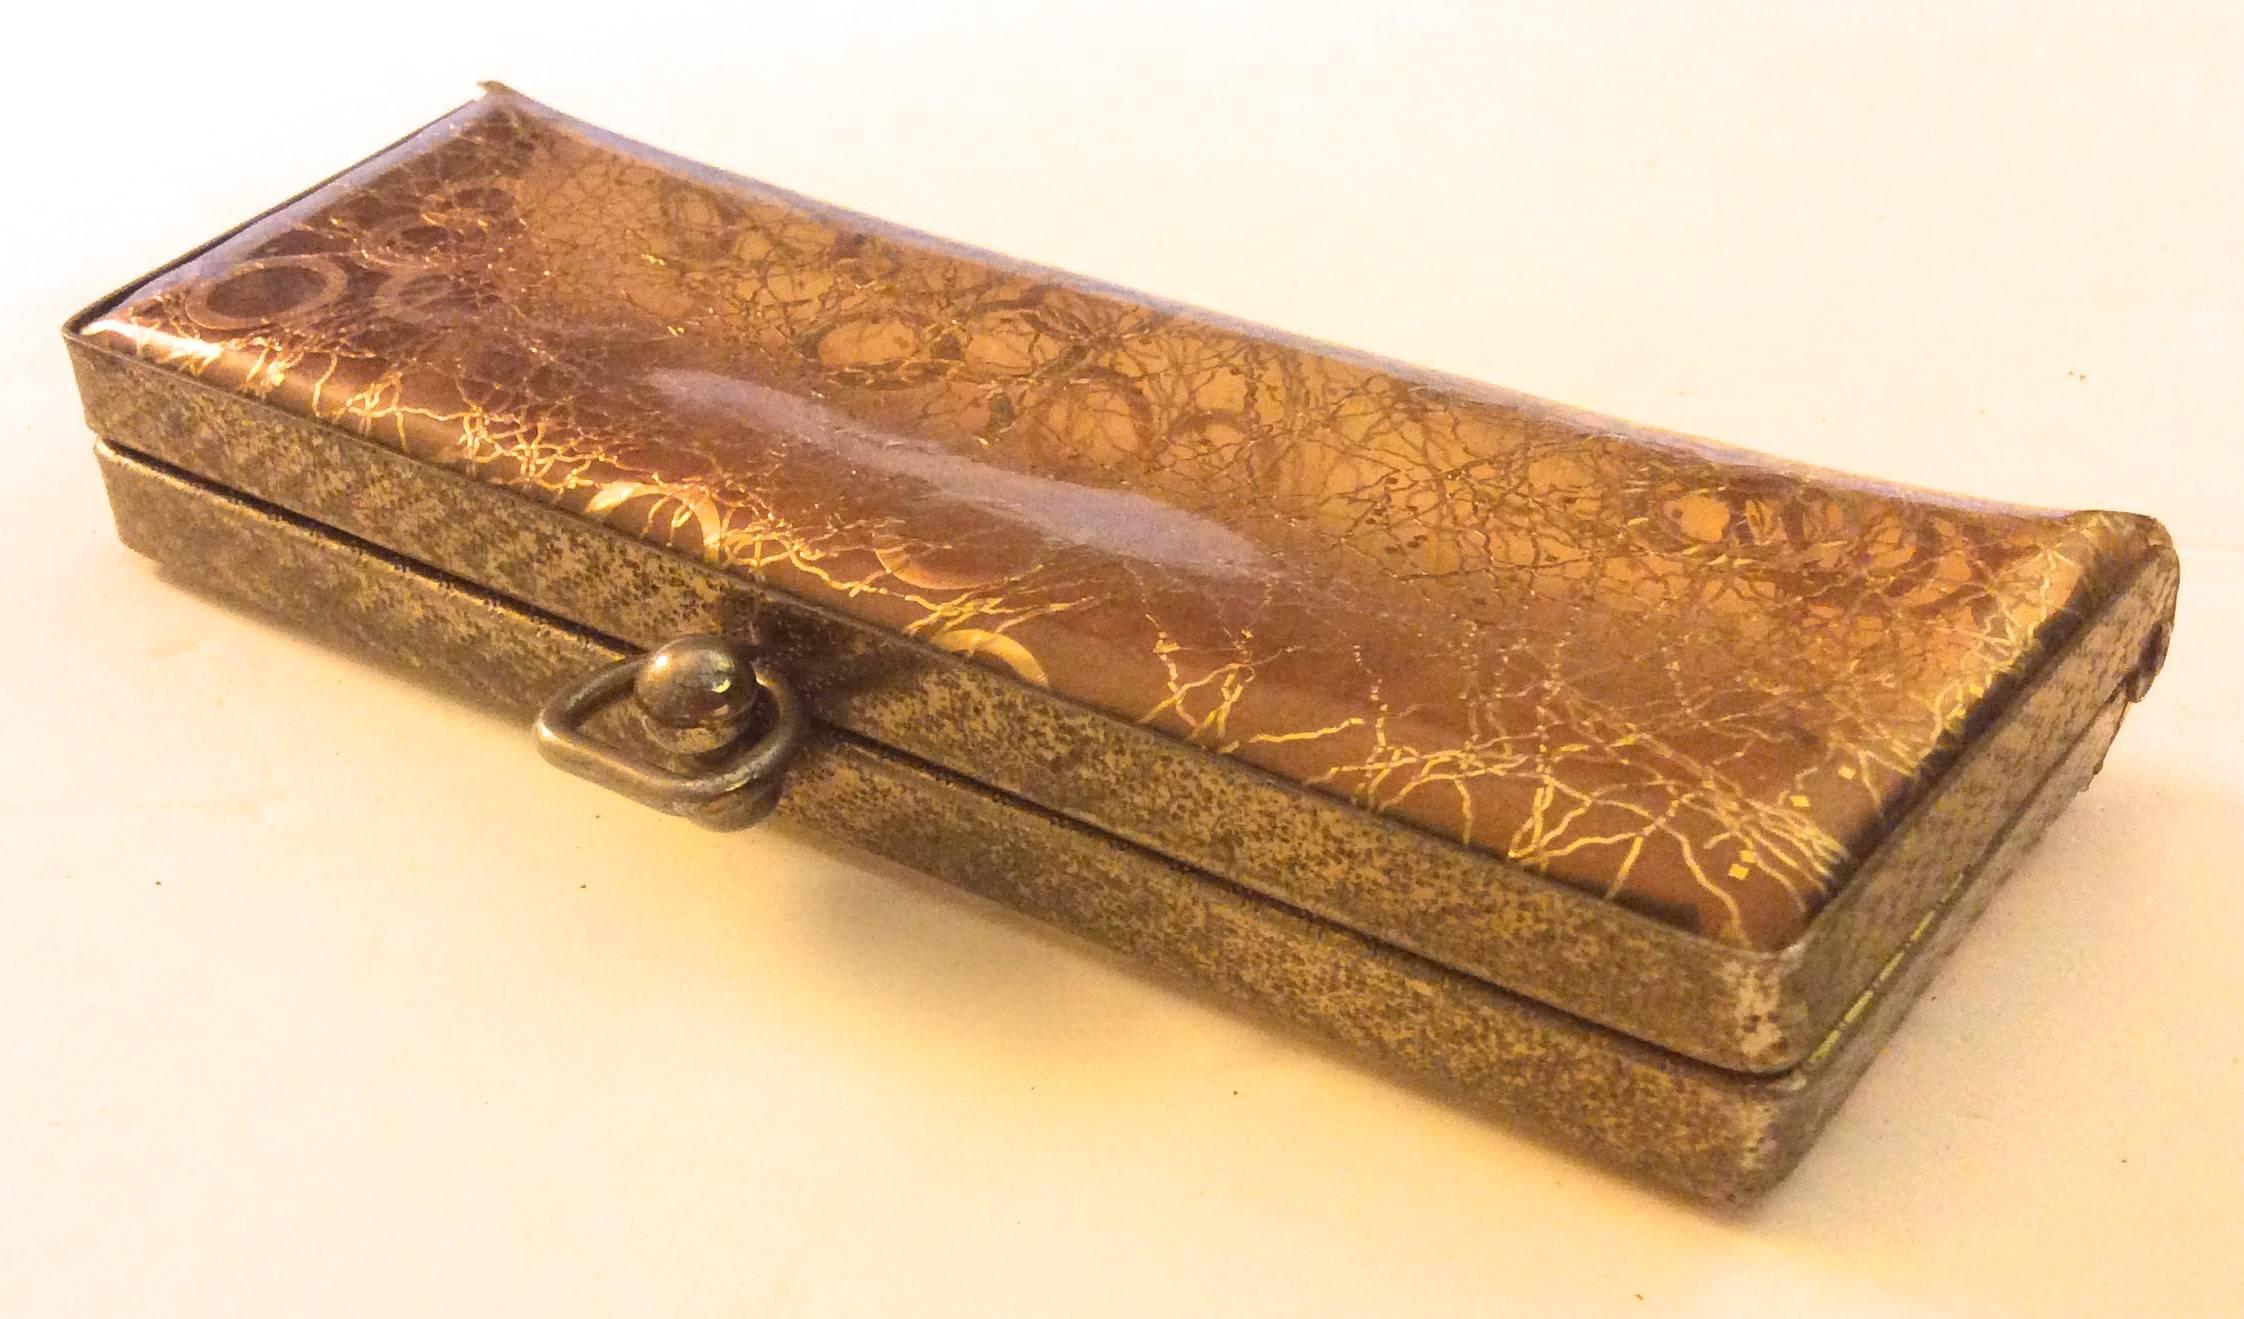 This vintage eyeglasses case is a stunning design made of clear and gold tone plastic. The case is lined in gold tone metal around the edge of the eyeglasses case. The case is in very good condition with some light scuffs around the exterior of the